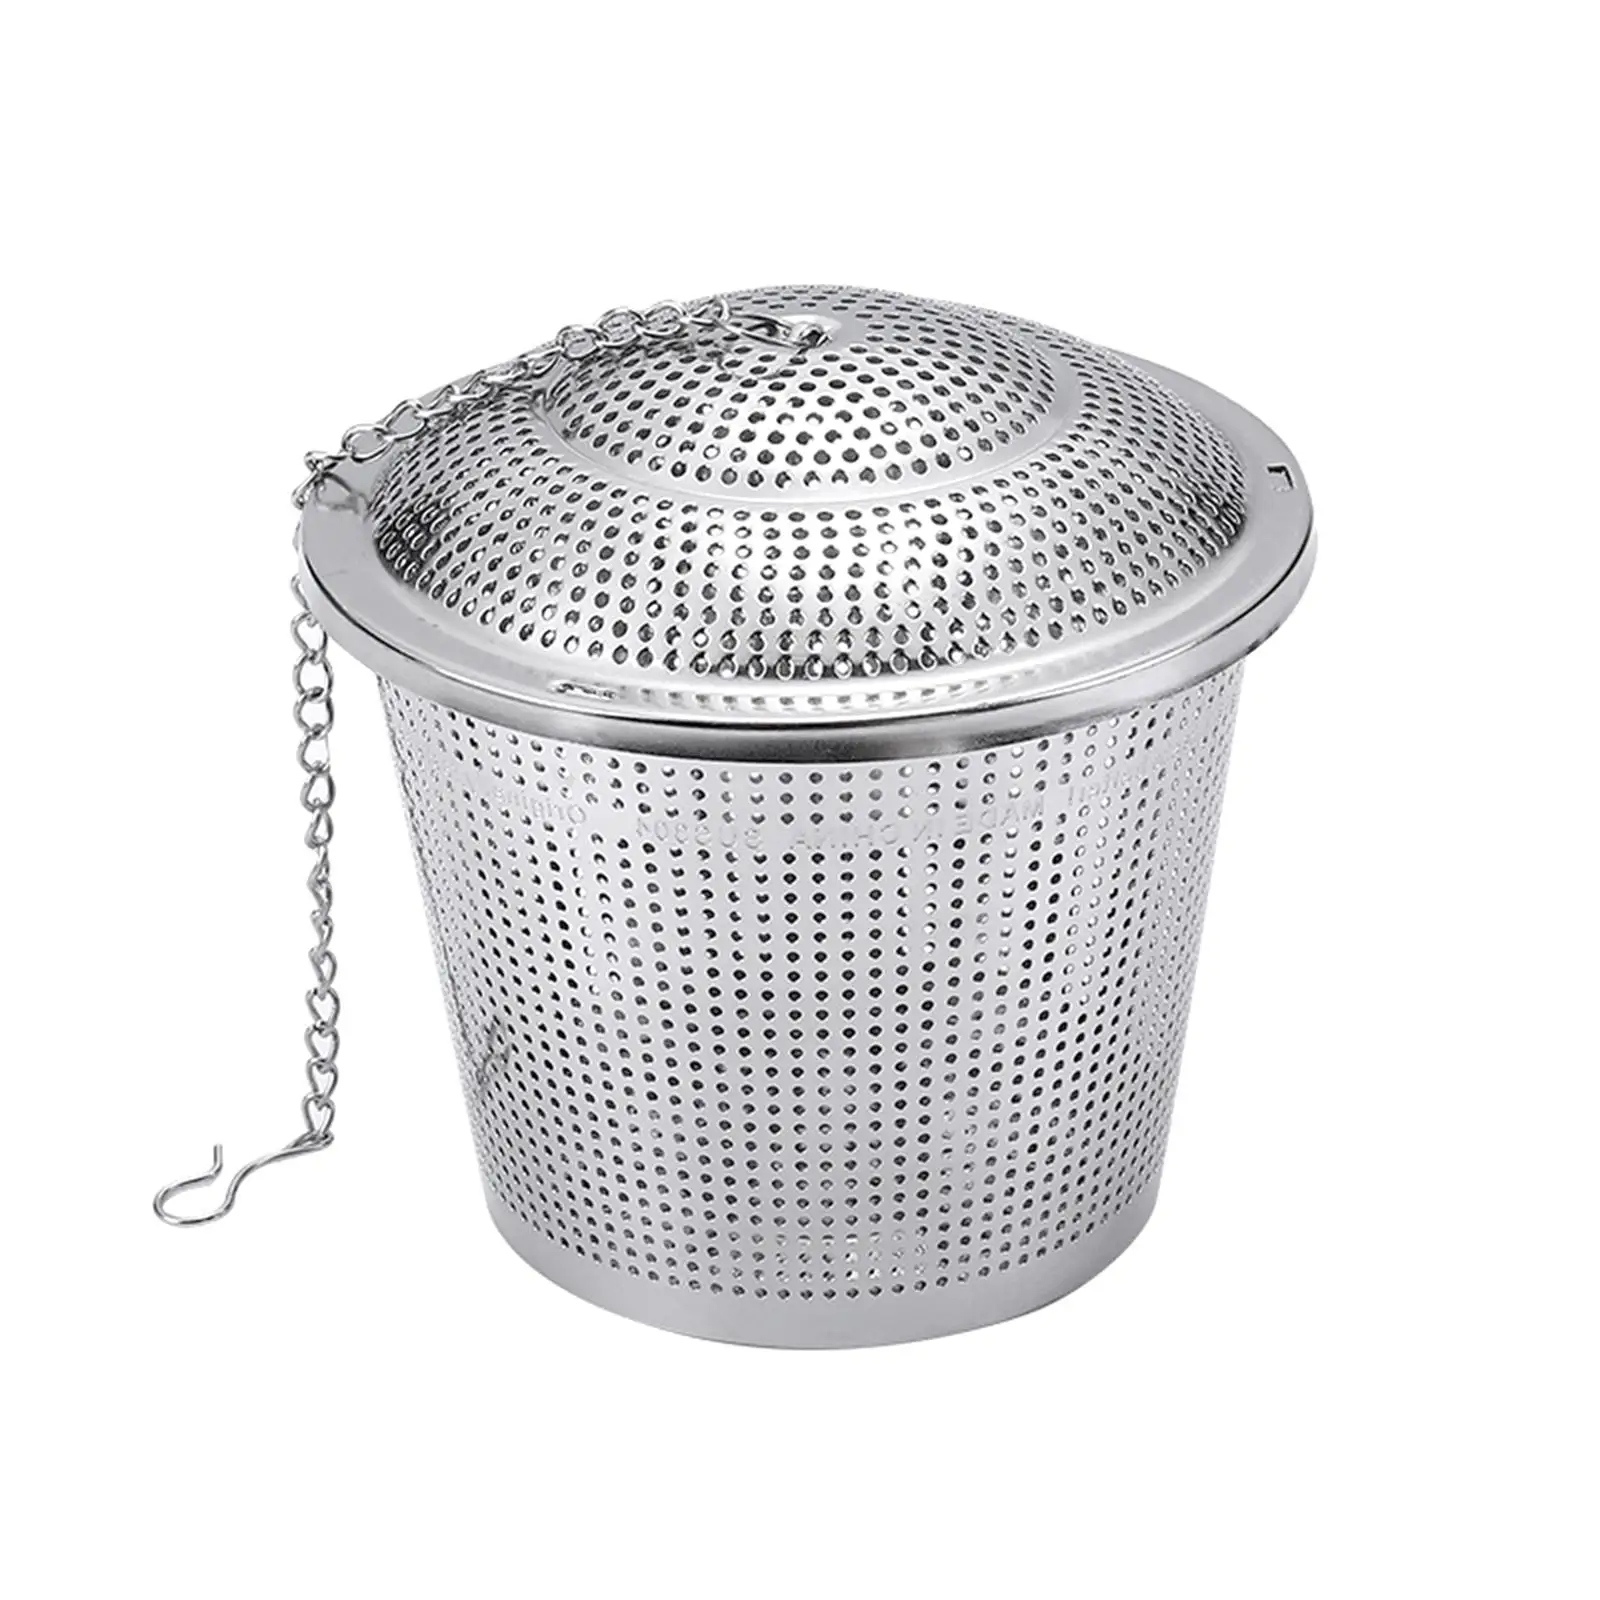 Tea Ball Infuser for Loose Leaf Stainless Steel with Extended Chain Hook Chained Lid Fine Mesh Spice Infuser for Stews Soup